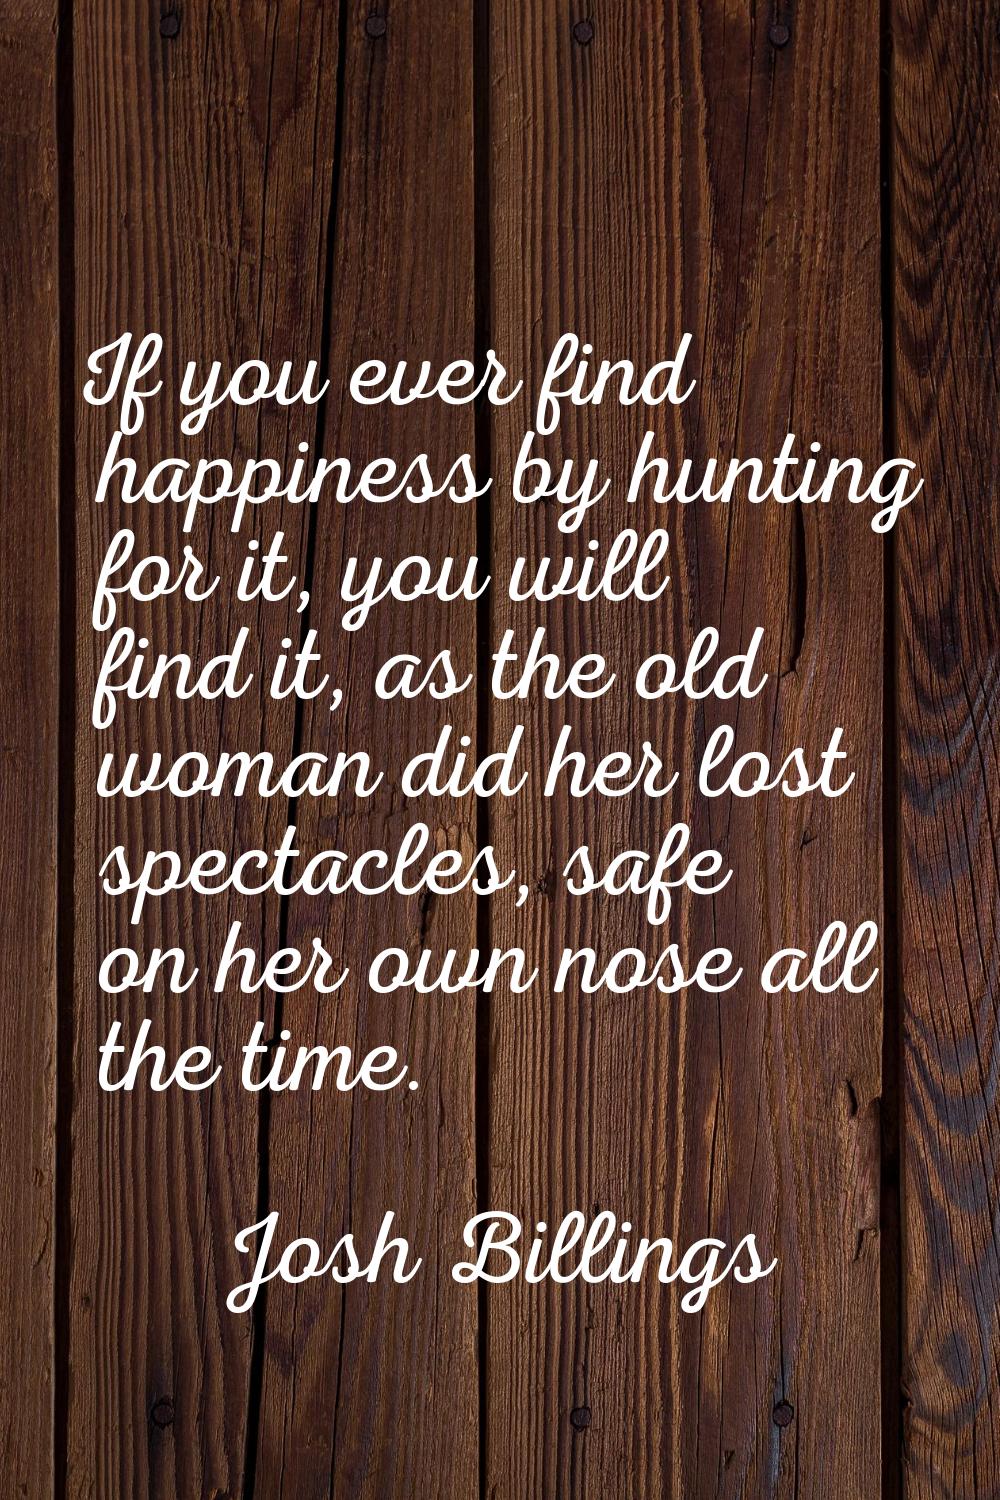 If you ever find happiness by hunting for it, you will find it, as the old woman did her lost spect